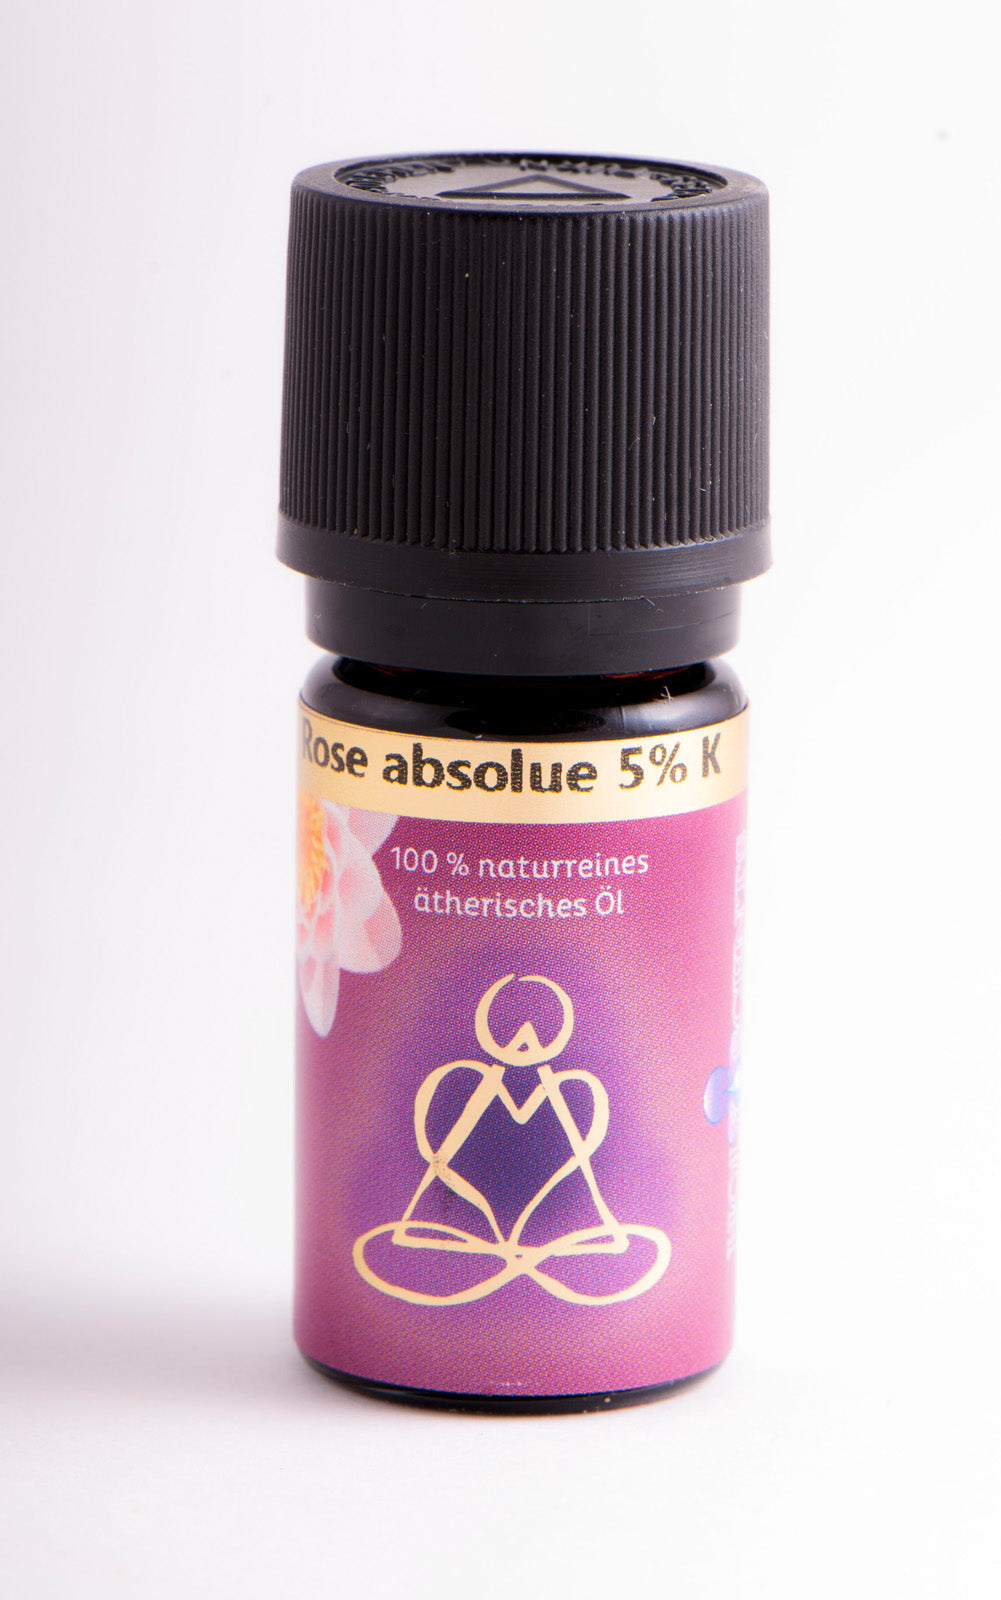 Holy Scents - Rose absolue 5% - Ätherisches Öl 5 ml